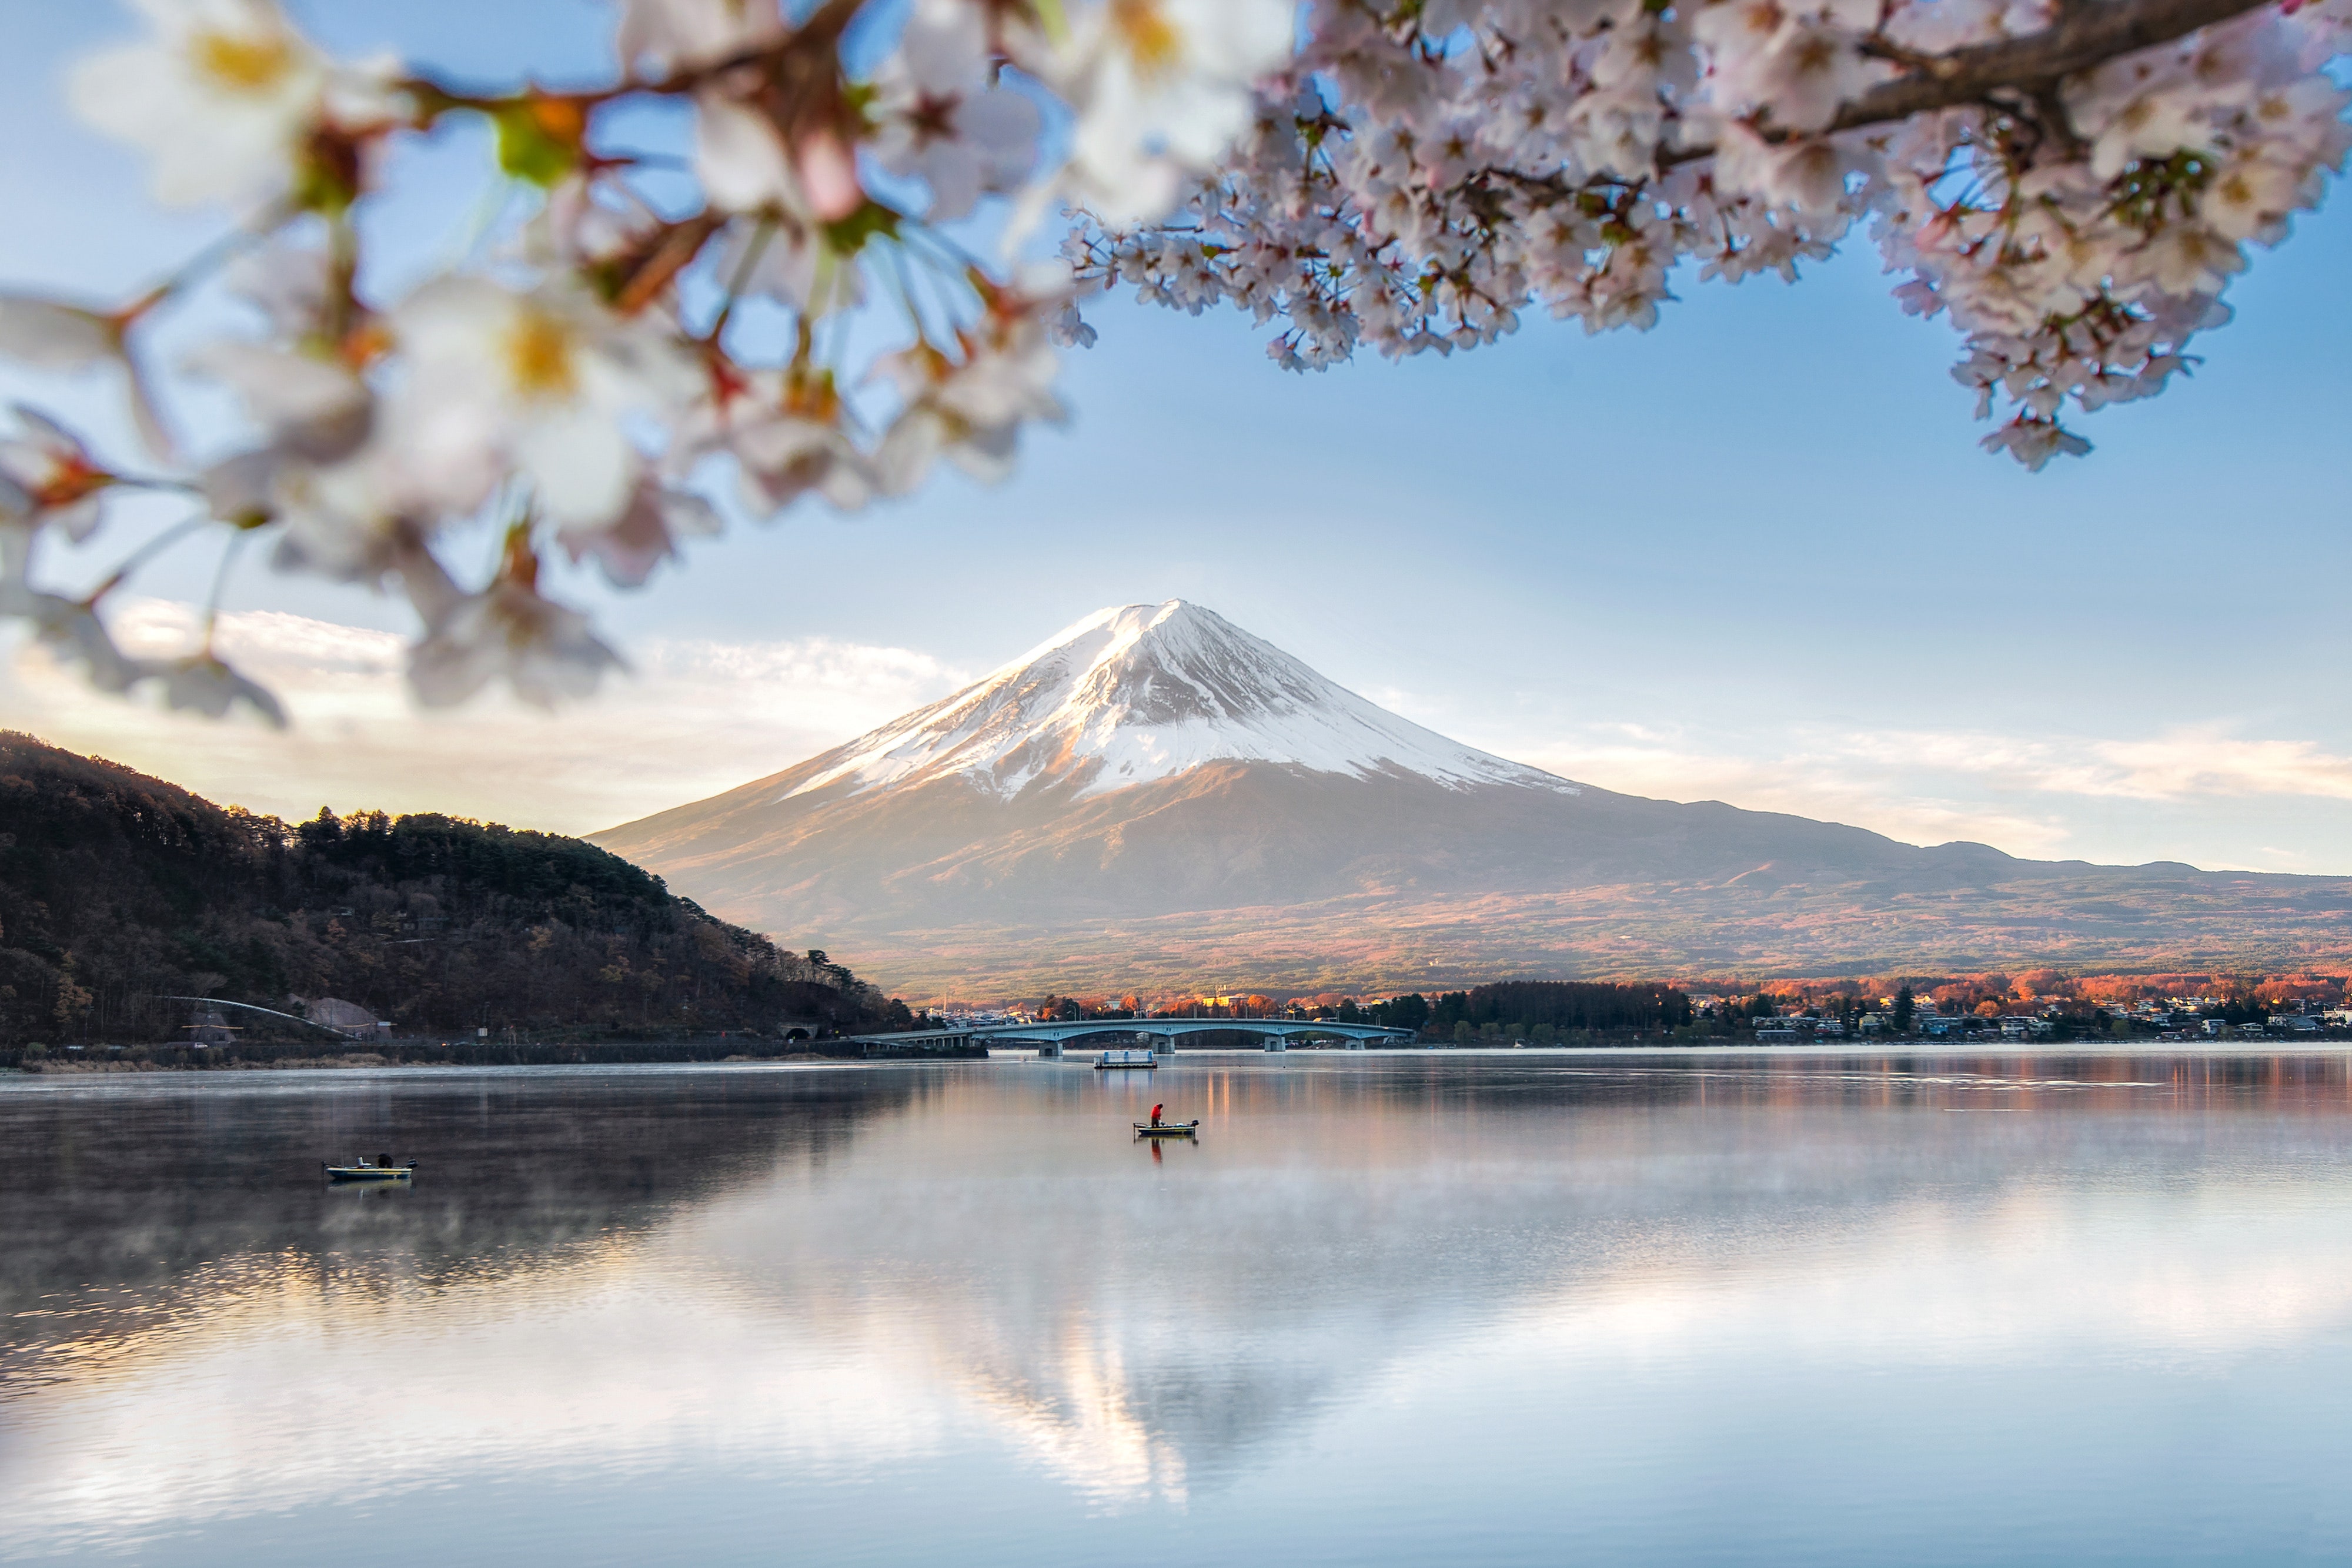 It’s hard to pick the single most <a href="https://www.cntraveler.com/gallery/most-beautiful-places-in-japan?mbid=synd_msn_rss&utm_source=msn&utm_medium=syndication">beautiful place in Japan</a>, but 12,388-foot Mount Fuji just might take the prize. Visit Lake Kawaguchiko in the spring for some of the best views of the mountain and <a href="https://www.cntraveler.com/gallery/best-places-to-see-cherry-blossoms-in-japan?mbid=synd_msn_rss&utm_source=msn&utm_medium=syndication">cherry blossom trees</a>—a postcard-worthy sight if we ever saw one. Or if you’re an avid hiker, plan a trip for mid-July until the end of August, when the snow melts enough to allow access to Fuji’s summit.<p>Sign up to receive the latest news, expert tips, and inspiration on all things travel</p><a href="https://www.cntraveler.com/newsletter/the-daily?sourceCode=msnsend">Inspire Me</a>